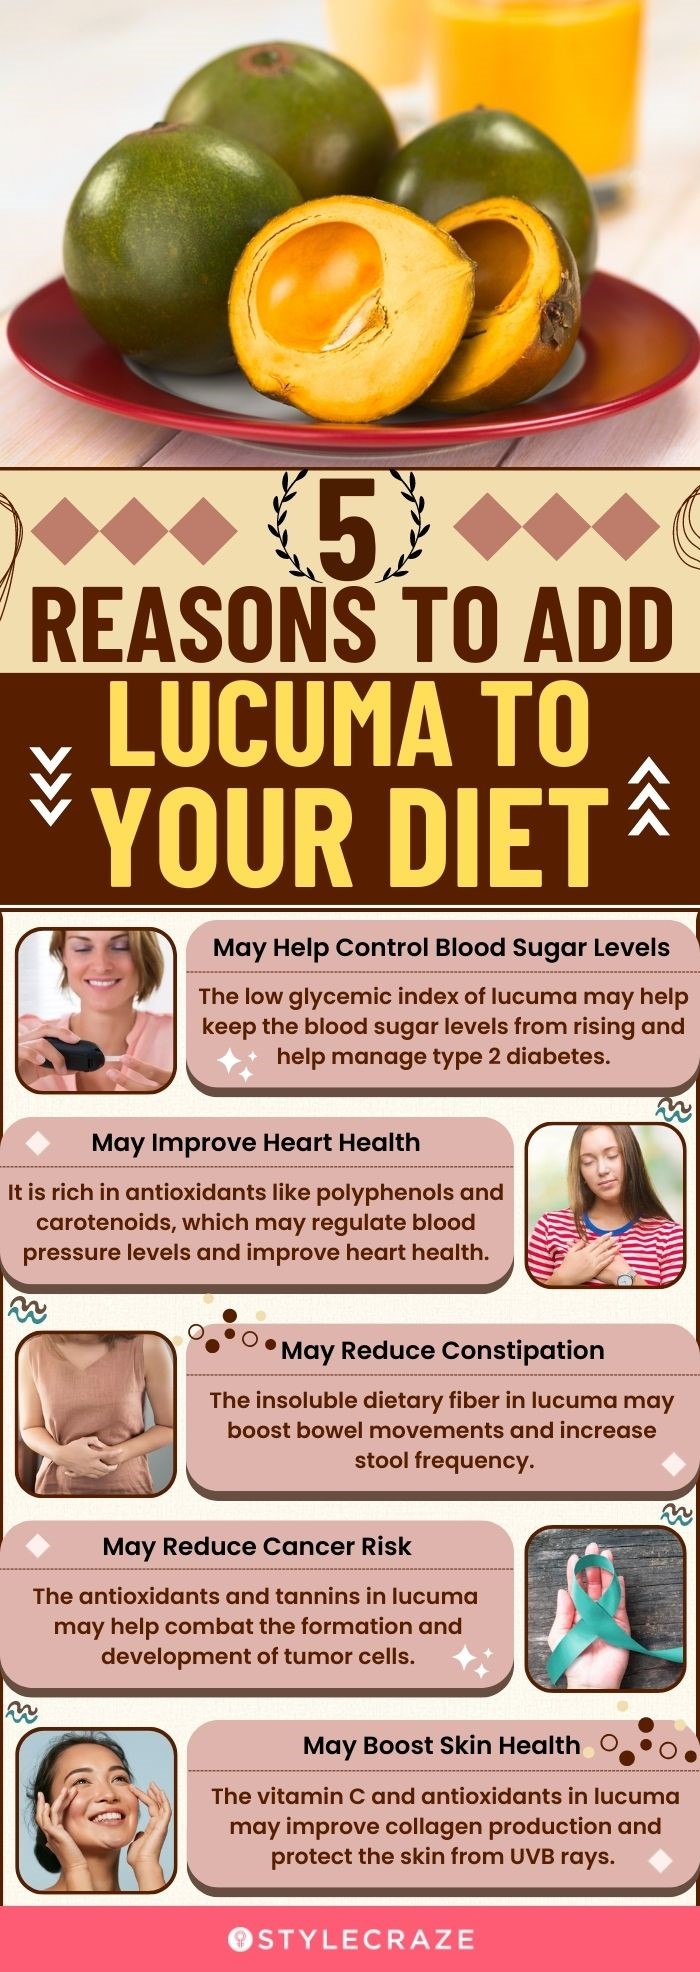 5 reasons to add lucuma to your diet (infographic)